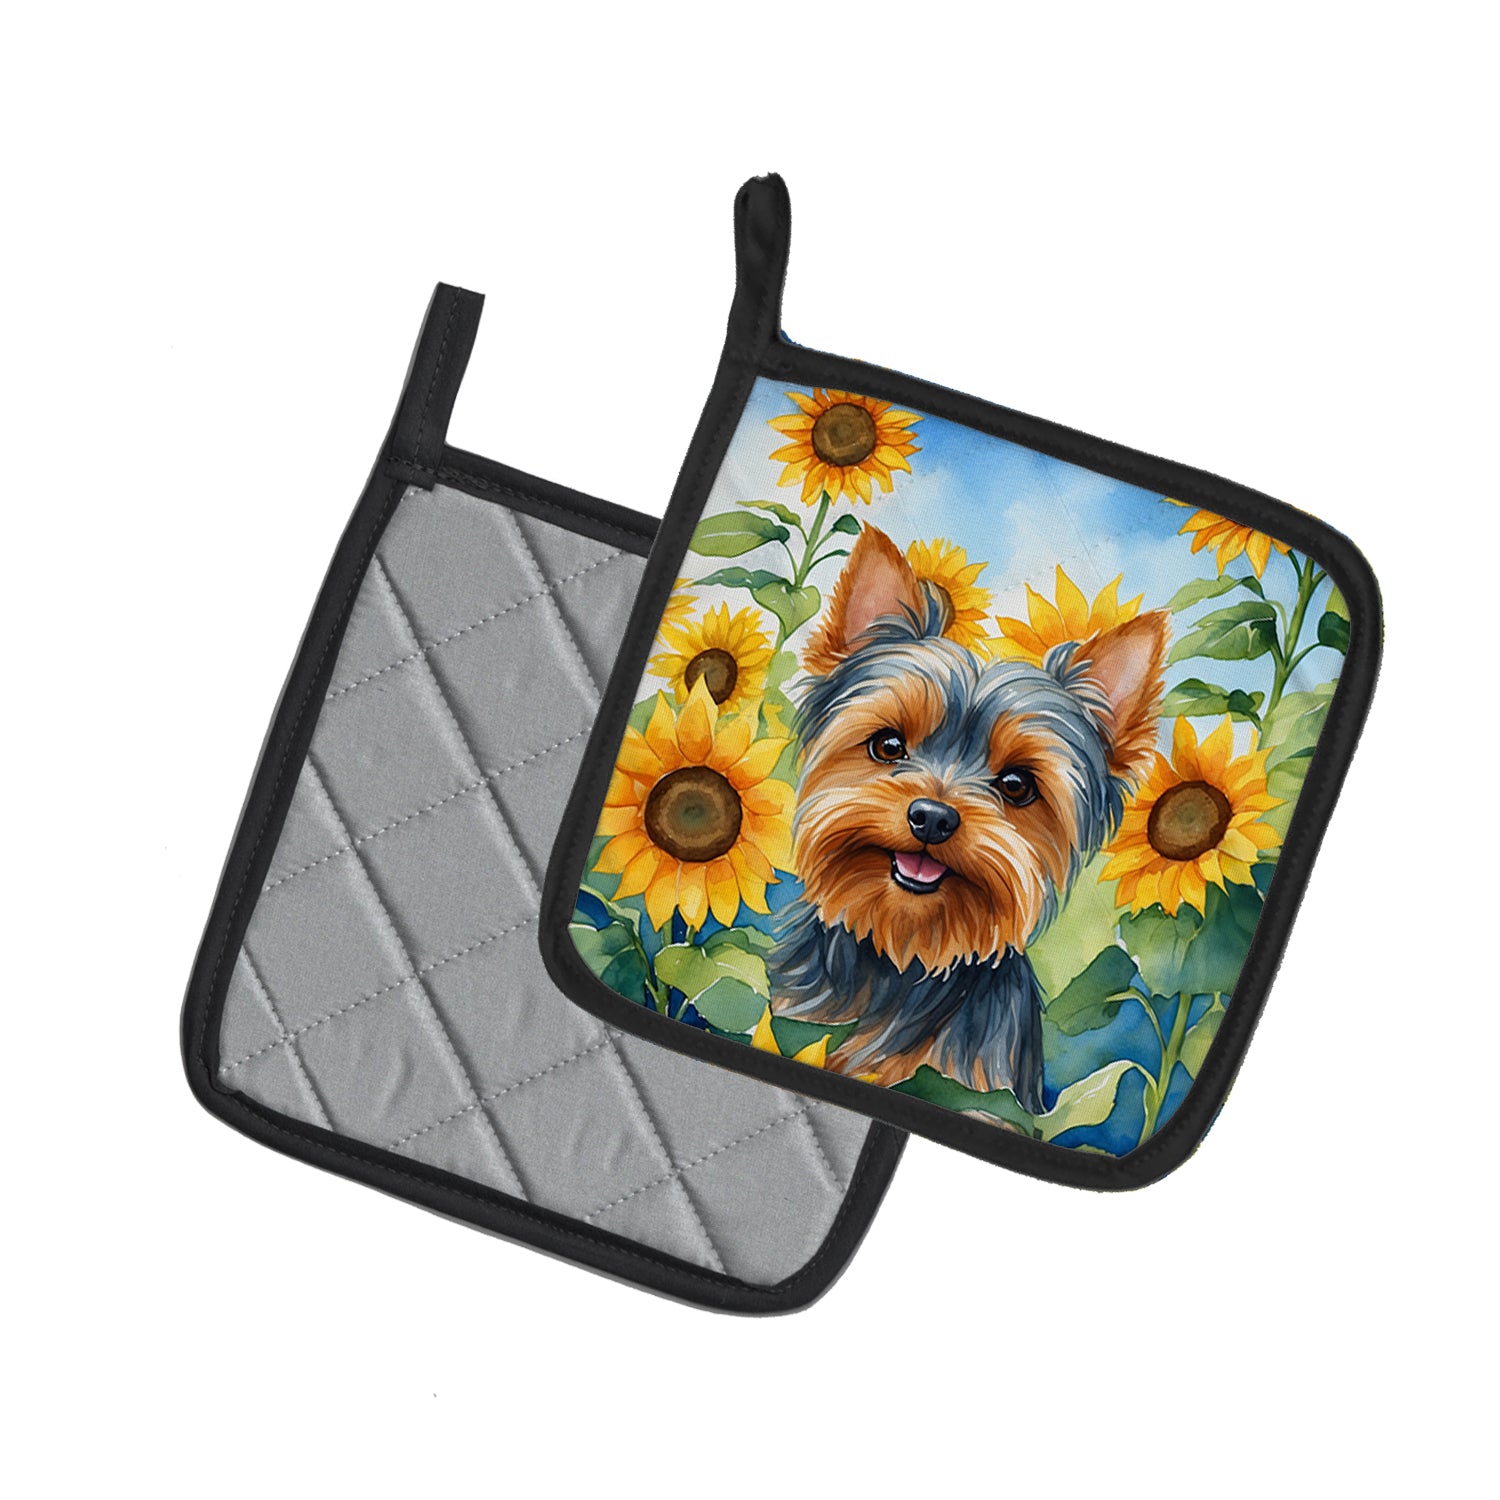 Buy this Yorkshire Terrier in Sunflowers Pair of Pot Holders